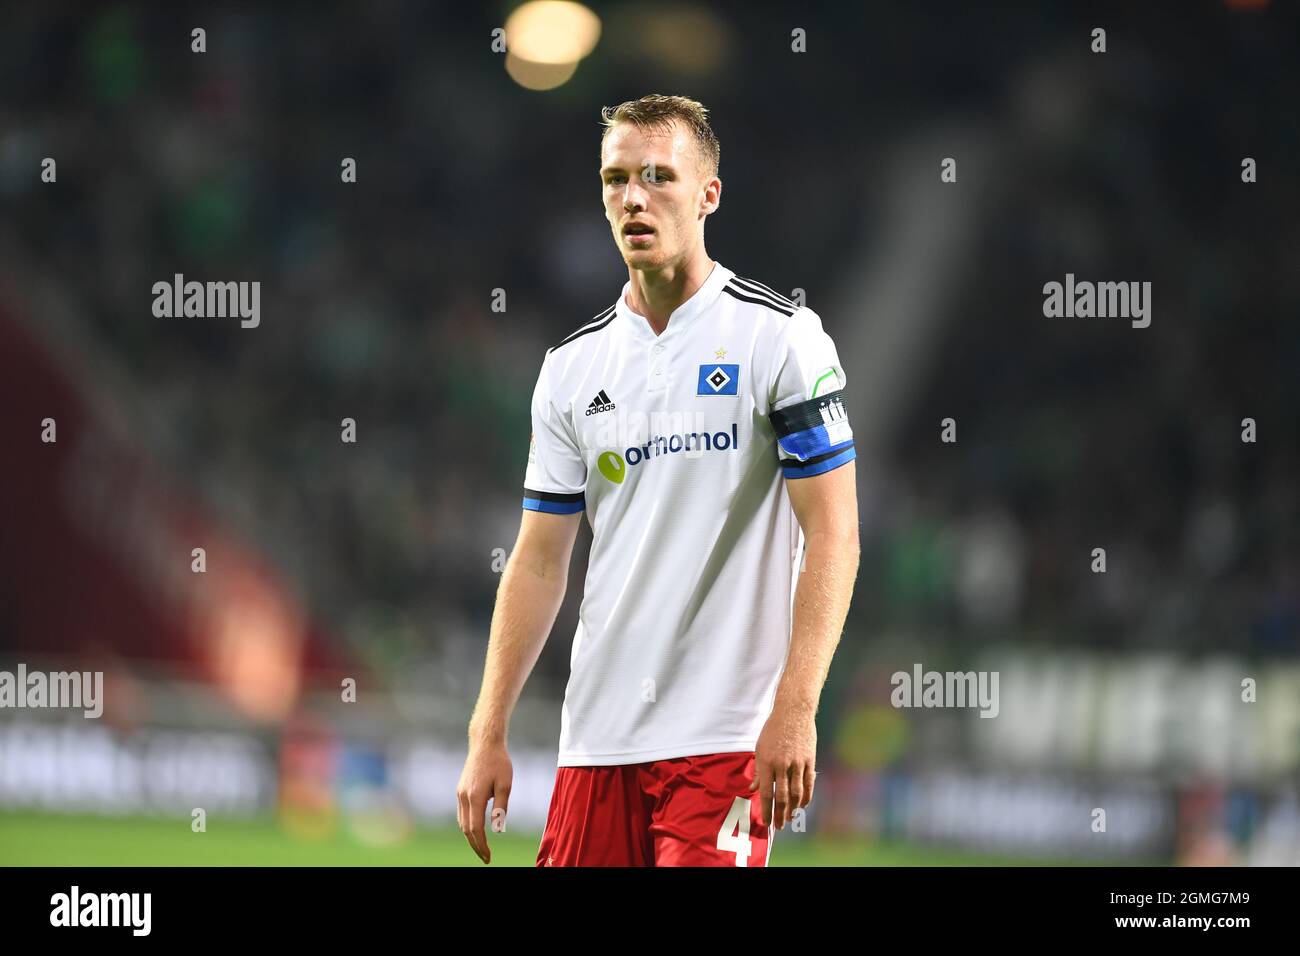 Bremen, Germany. 18th Sep, 2021. Football: 2. Bundesliga, Werder Bremen - Hamburger SV, Matchday 7, wohninvest Weserstadion. Hamburg captain Sebastian Schonlau is sent off after receiving a red card. Credit: Carmen Jaspersen/dpa - IMPORTANT NOTE: In accordance with the regulations of the DFL Deutsche Fußball Liga and/or the DFB Deutscher Fußball-Bund, it is prohibited to use or have used photographs taken in the stadium and/or of the match in the form of sequence pictures and/or video-like photo series./dpa/Alamy Live News Stock Photo